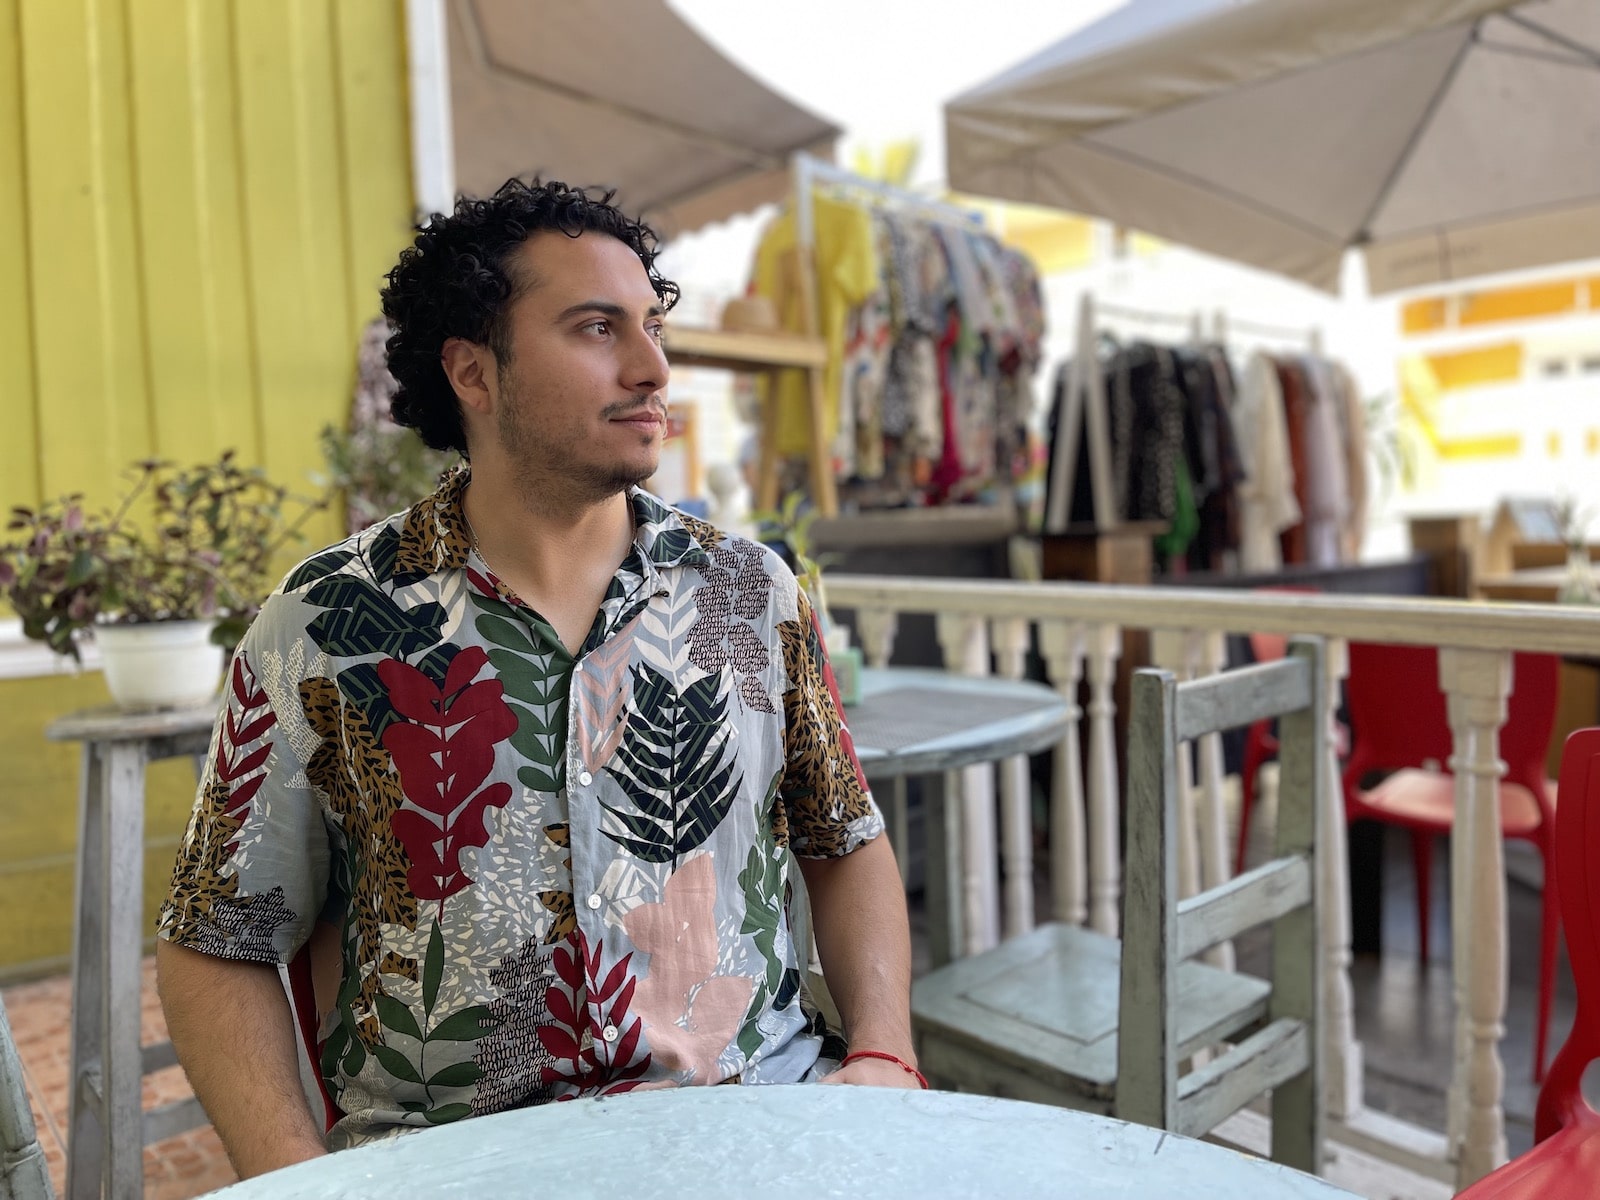 a man in a botannical-print shirt sits at a table near racks of clothes and outdoor umbrellas